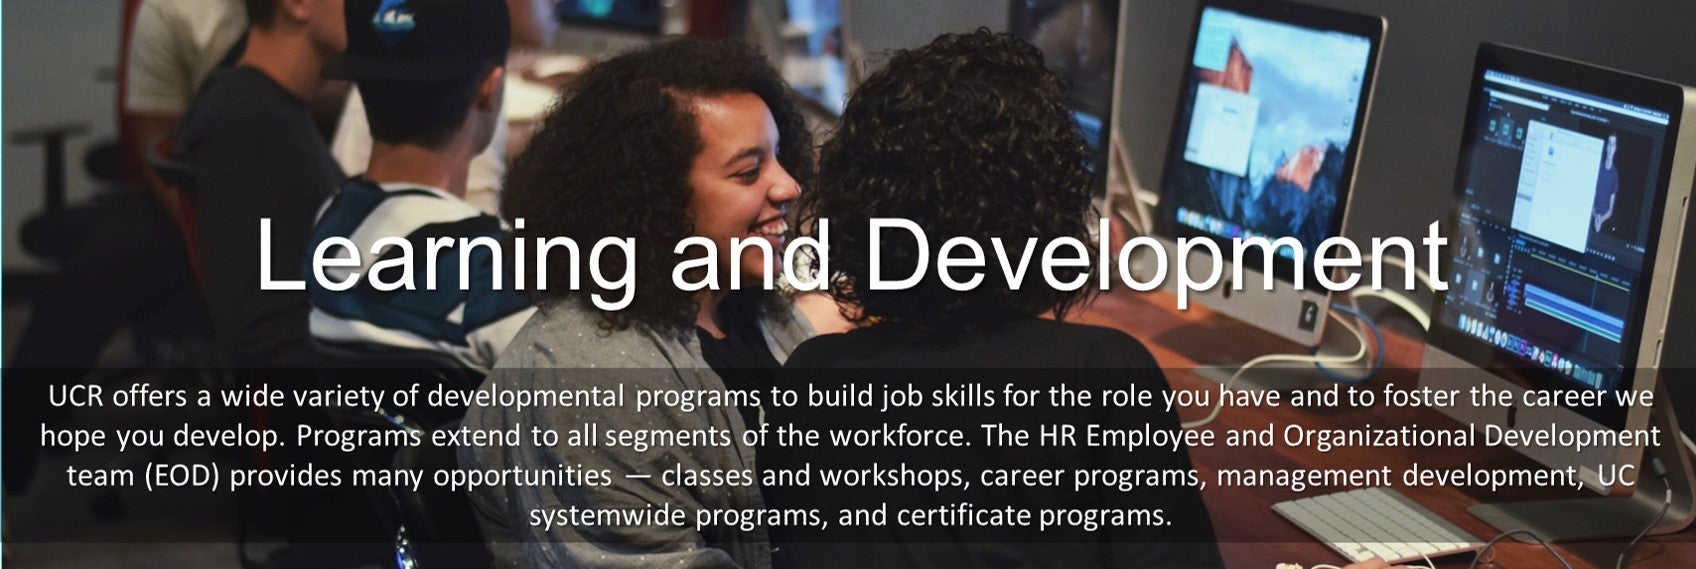 Learning and Development banner